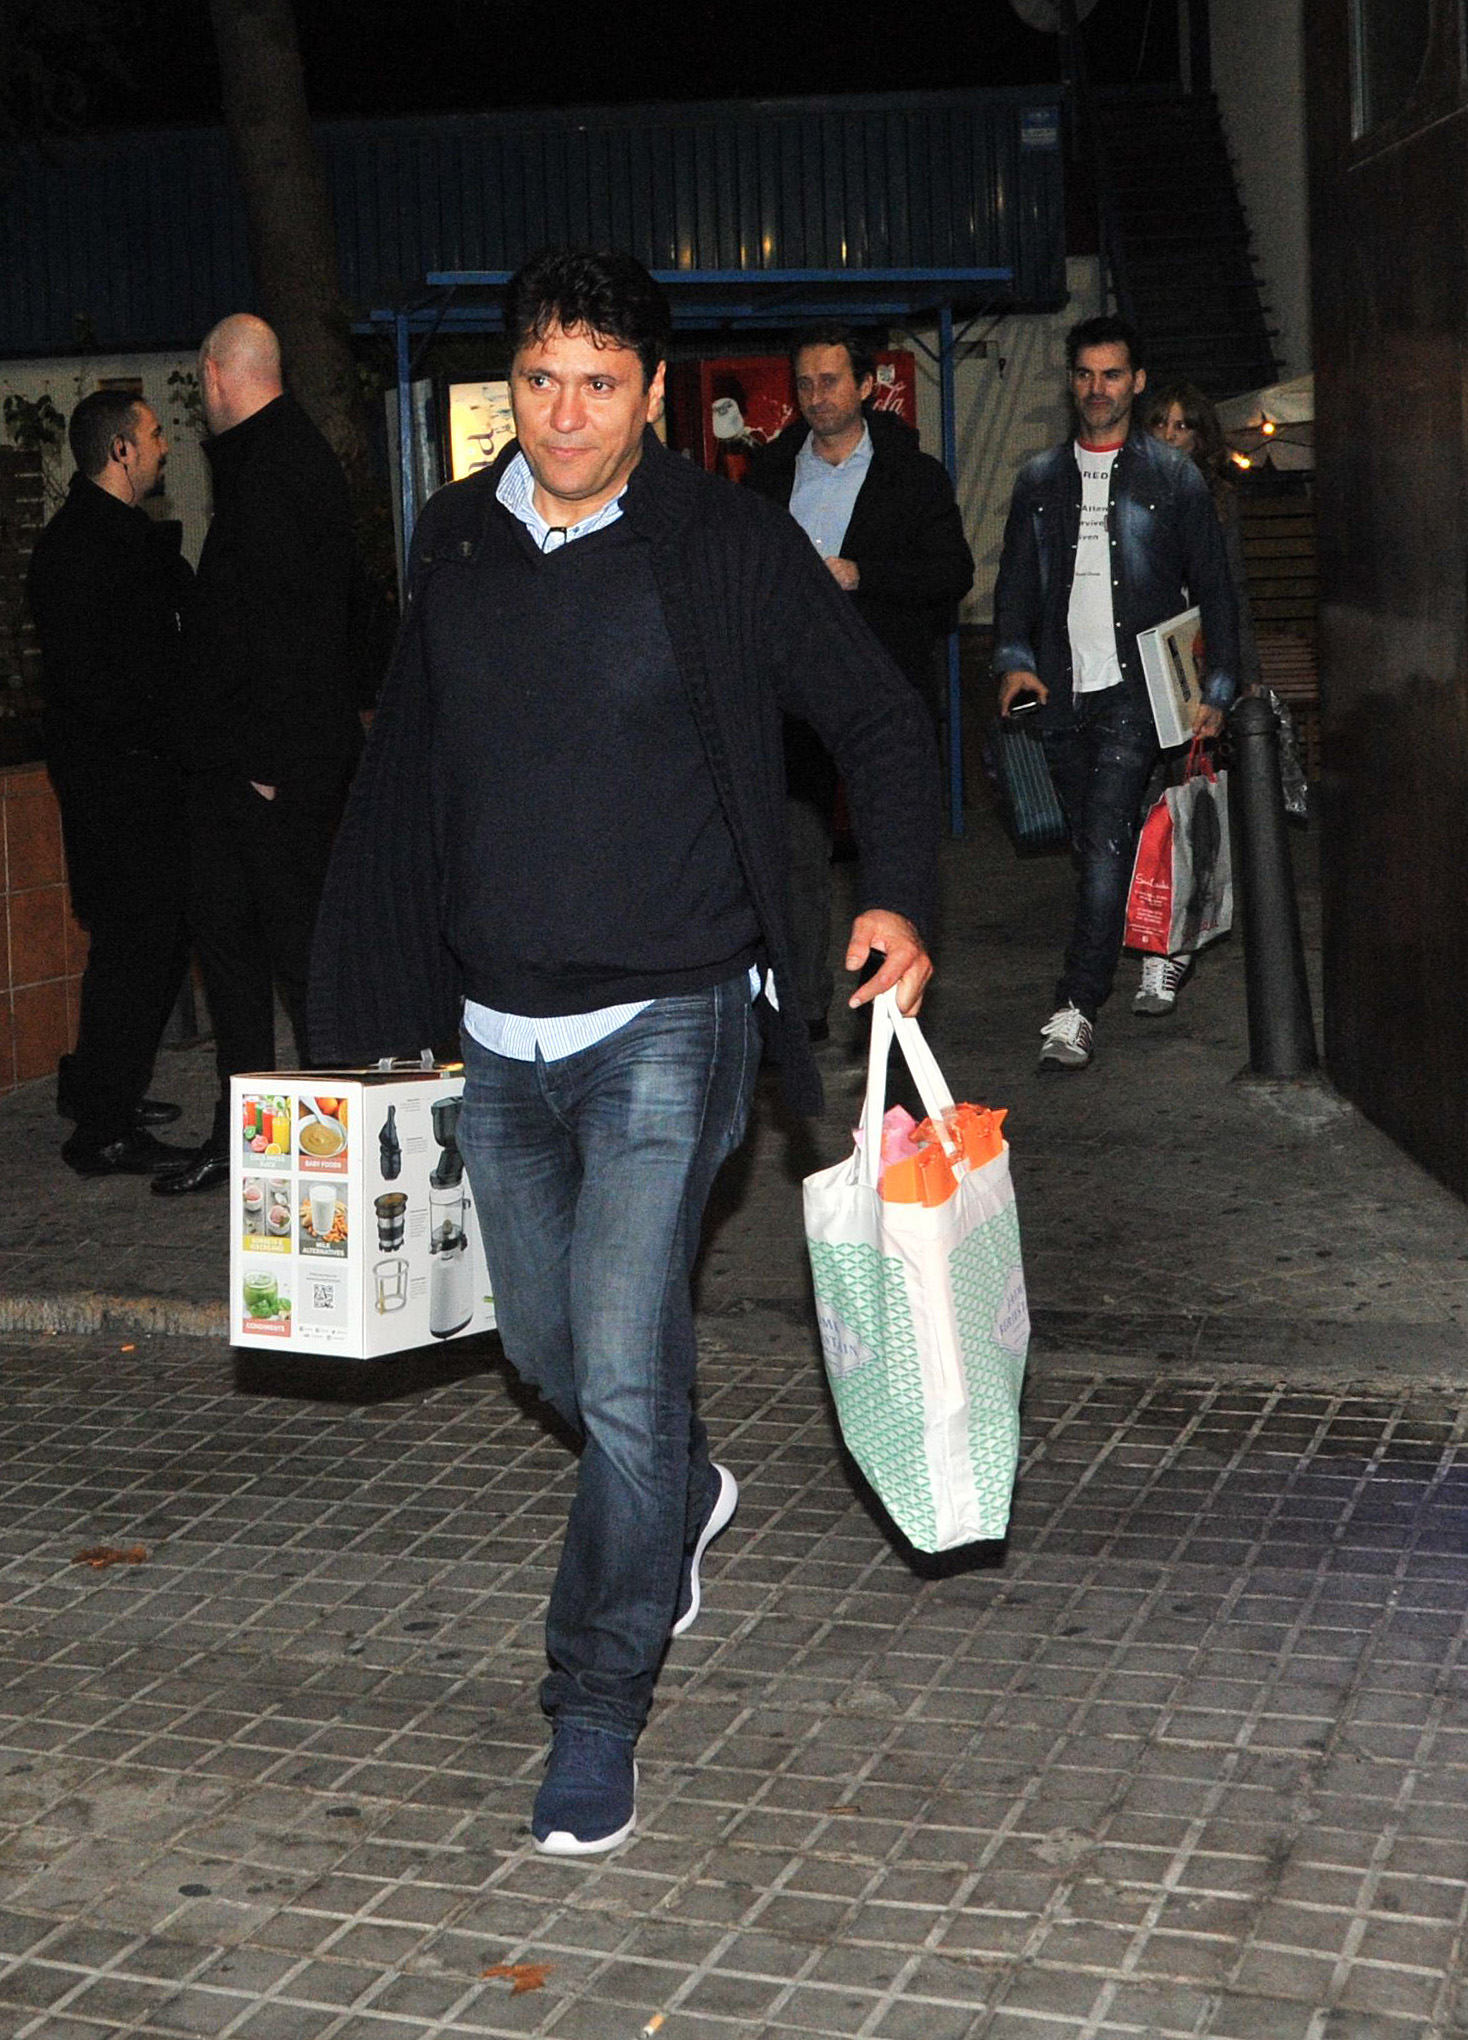 Shakira's brother Tonino Mebarak is seen bringing Shakira and Gerard Pique's birthdays' presents at Bowling center on February 2, 2016, in Barcelona, Spain. | Source: Getty Images